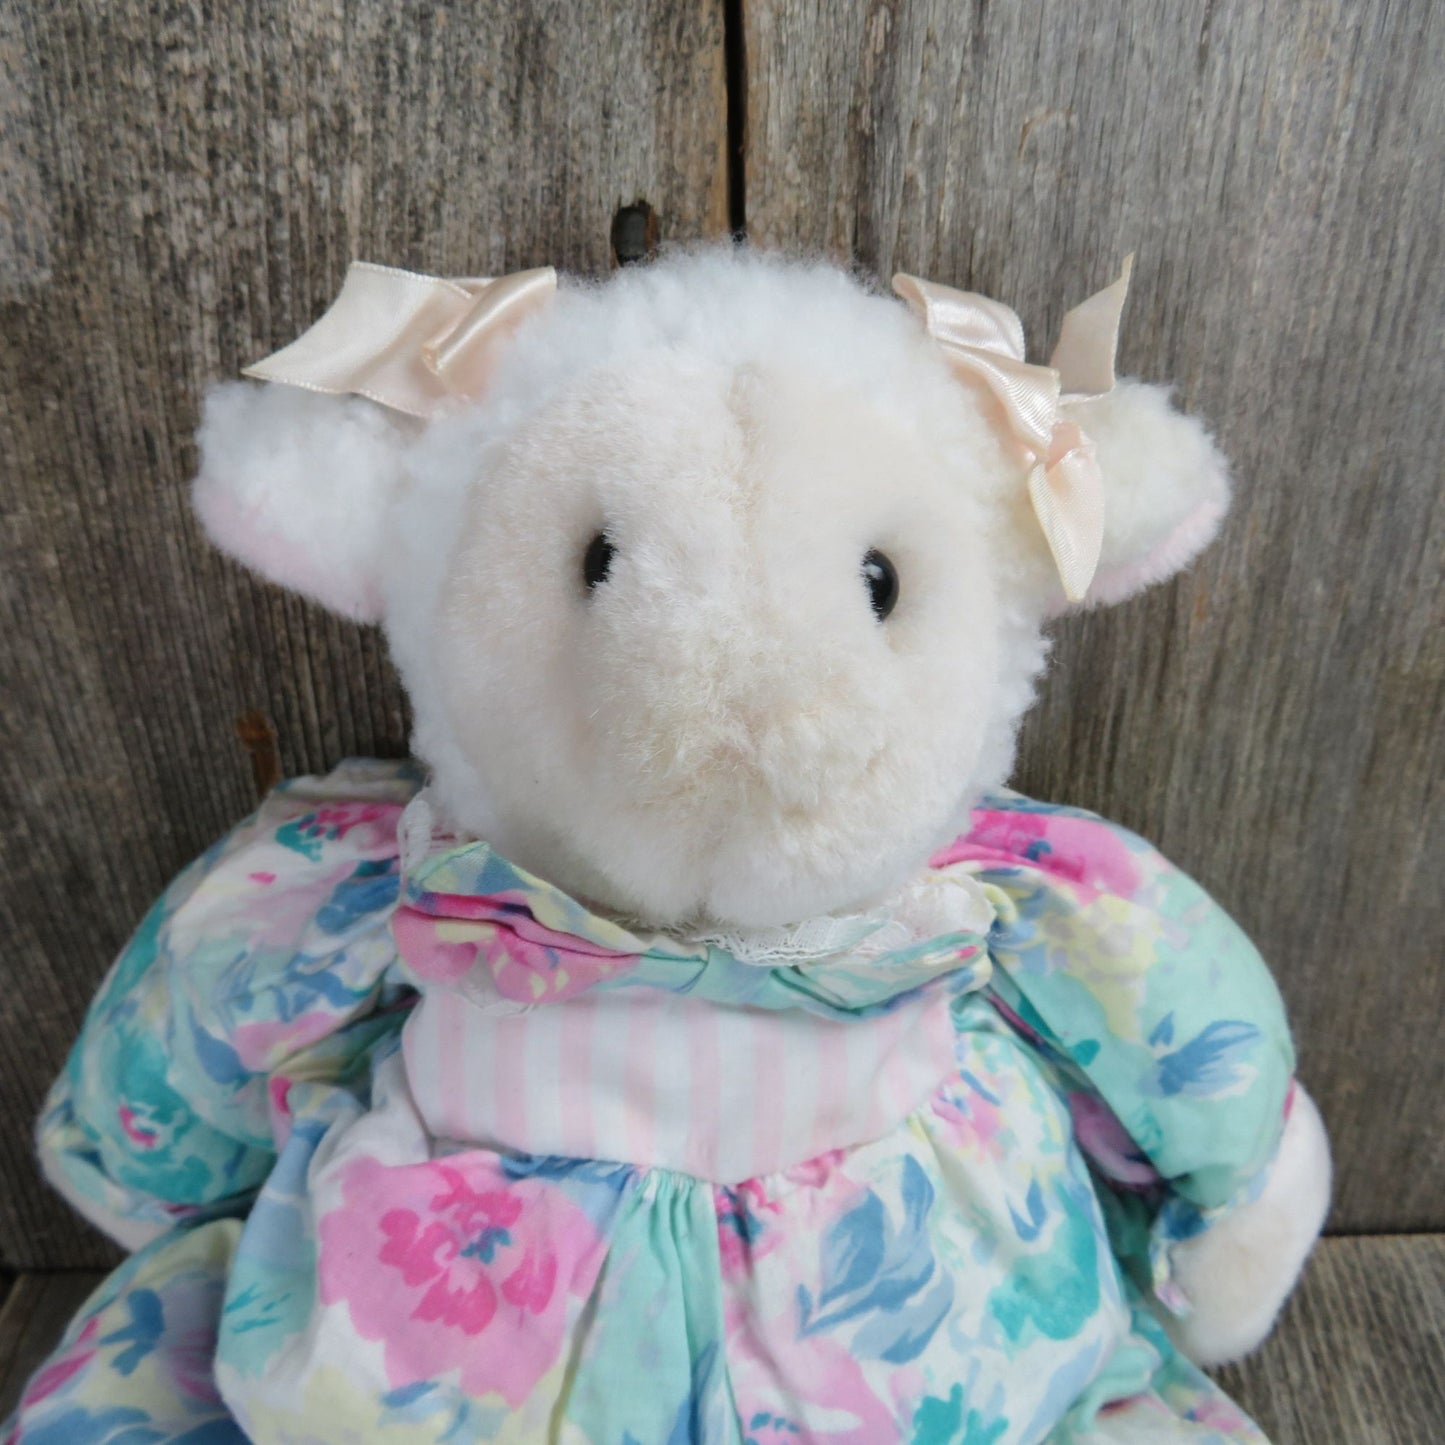 Lamb Sheep Plush Floral Fabric Body Blue and Pink Stuffed Animal PCI 1992 Easter